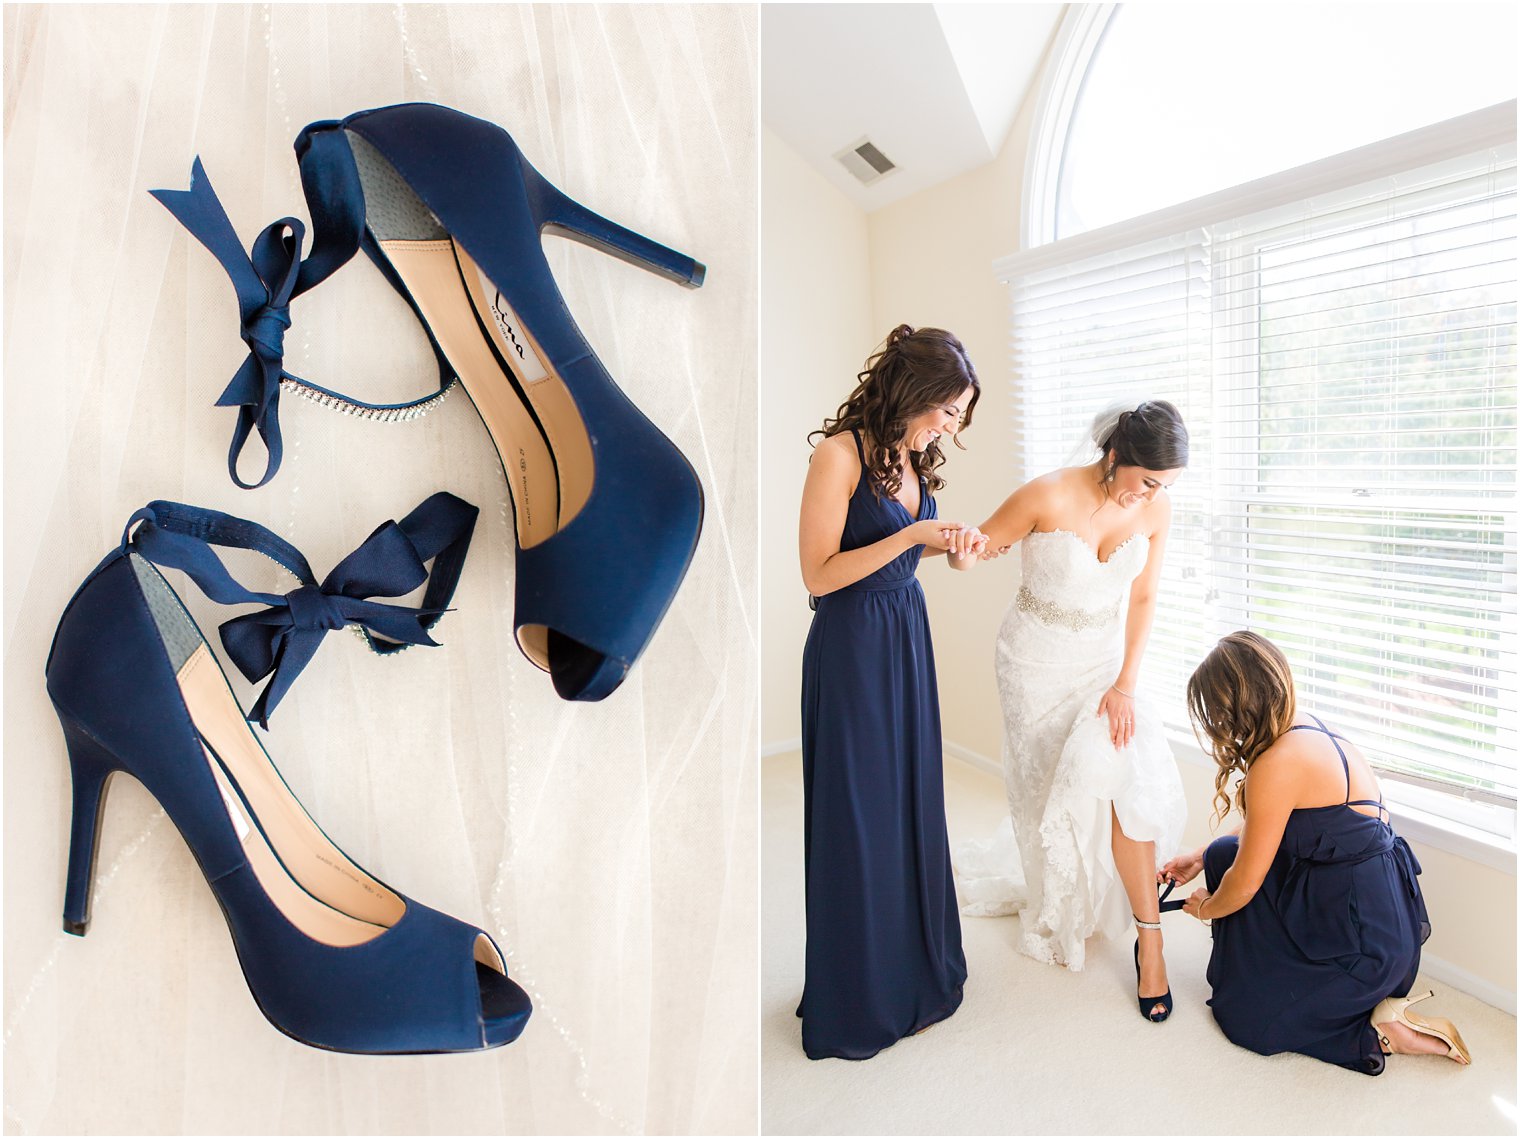 Blue Nina shoes for wedding day